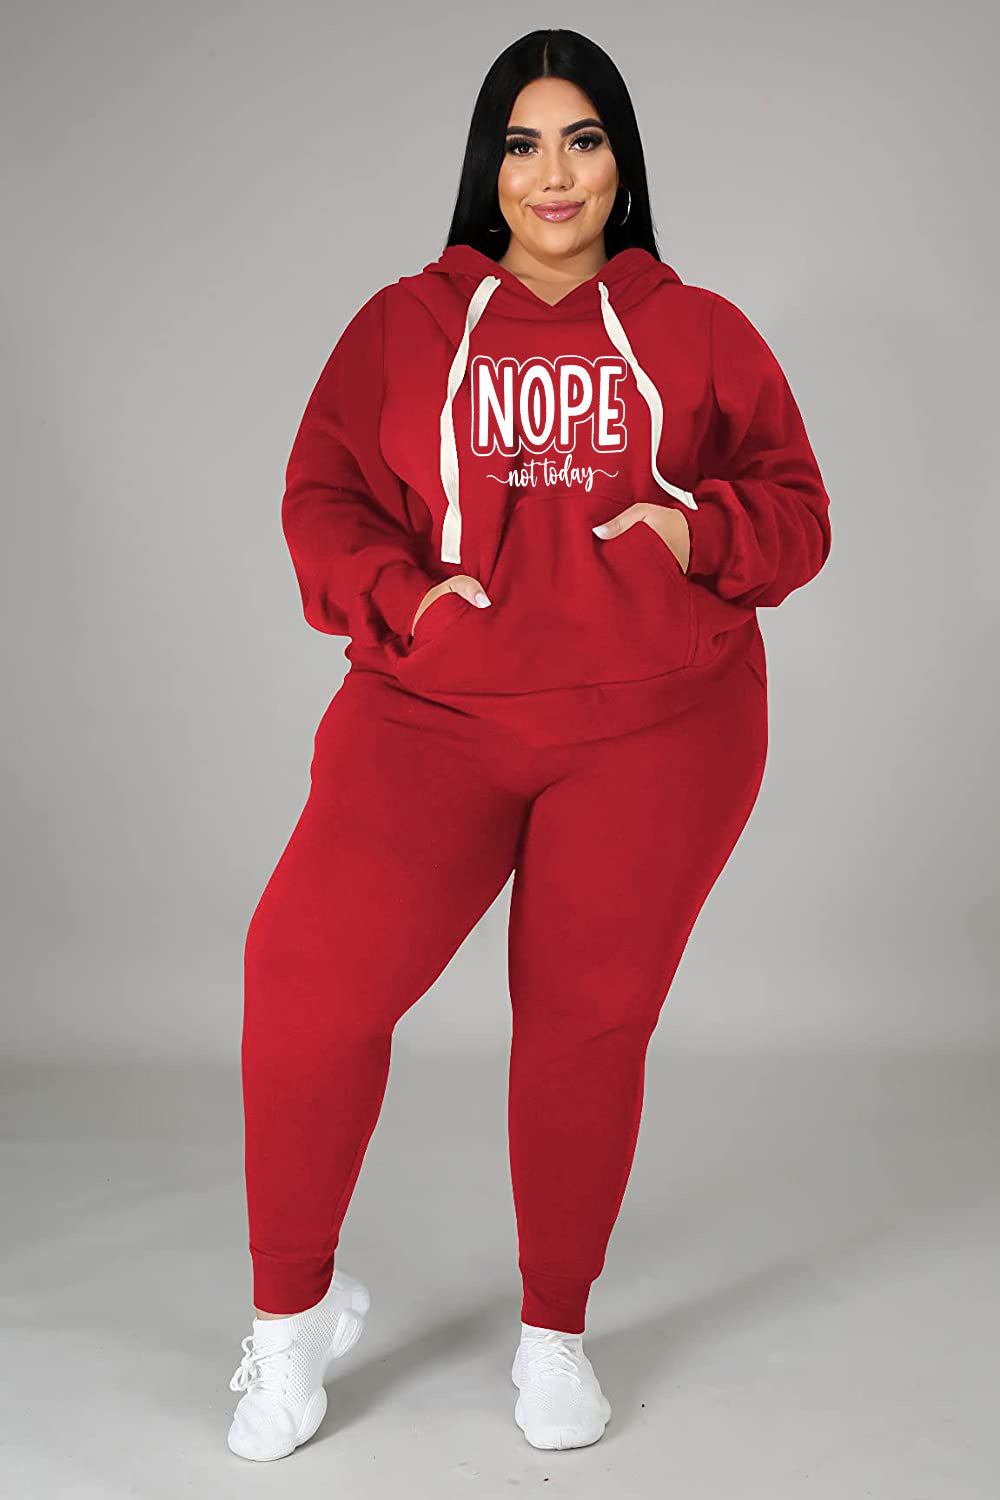 BamBam Plus Size Women's Sports Hoodies Casual Two-Piece Tracksuit Set - BamBam